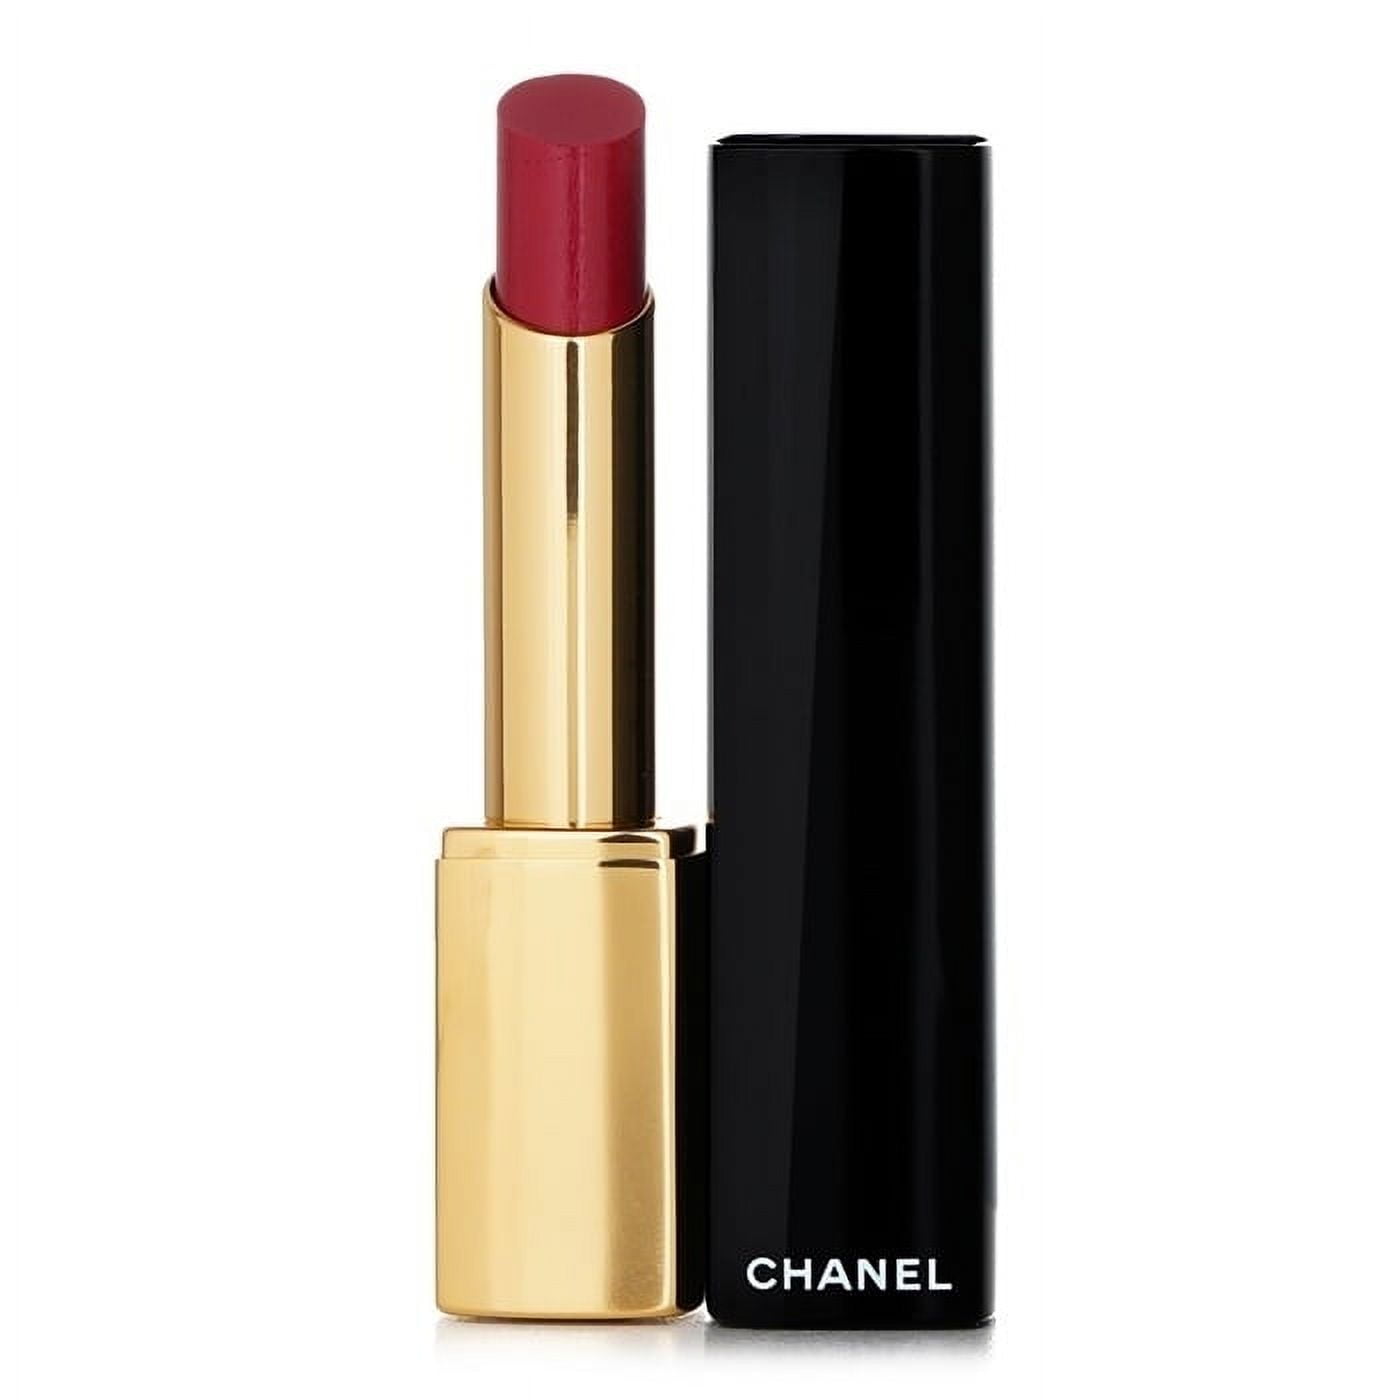 Chanel Rouge Allure Velvet Review (New Shades) - Reviews and Other Stuff